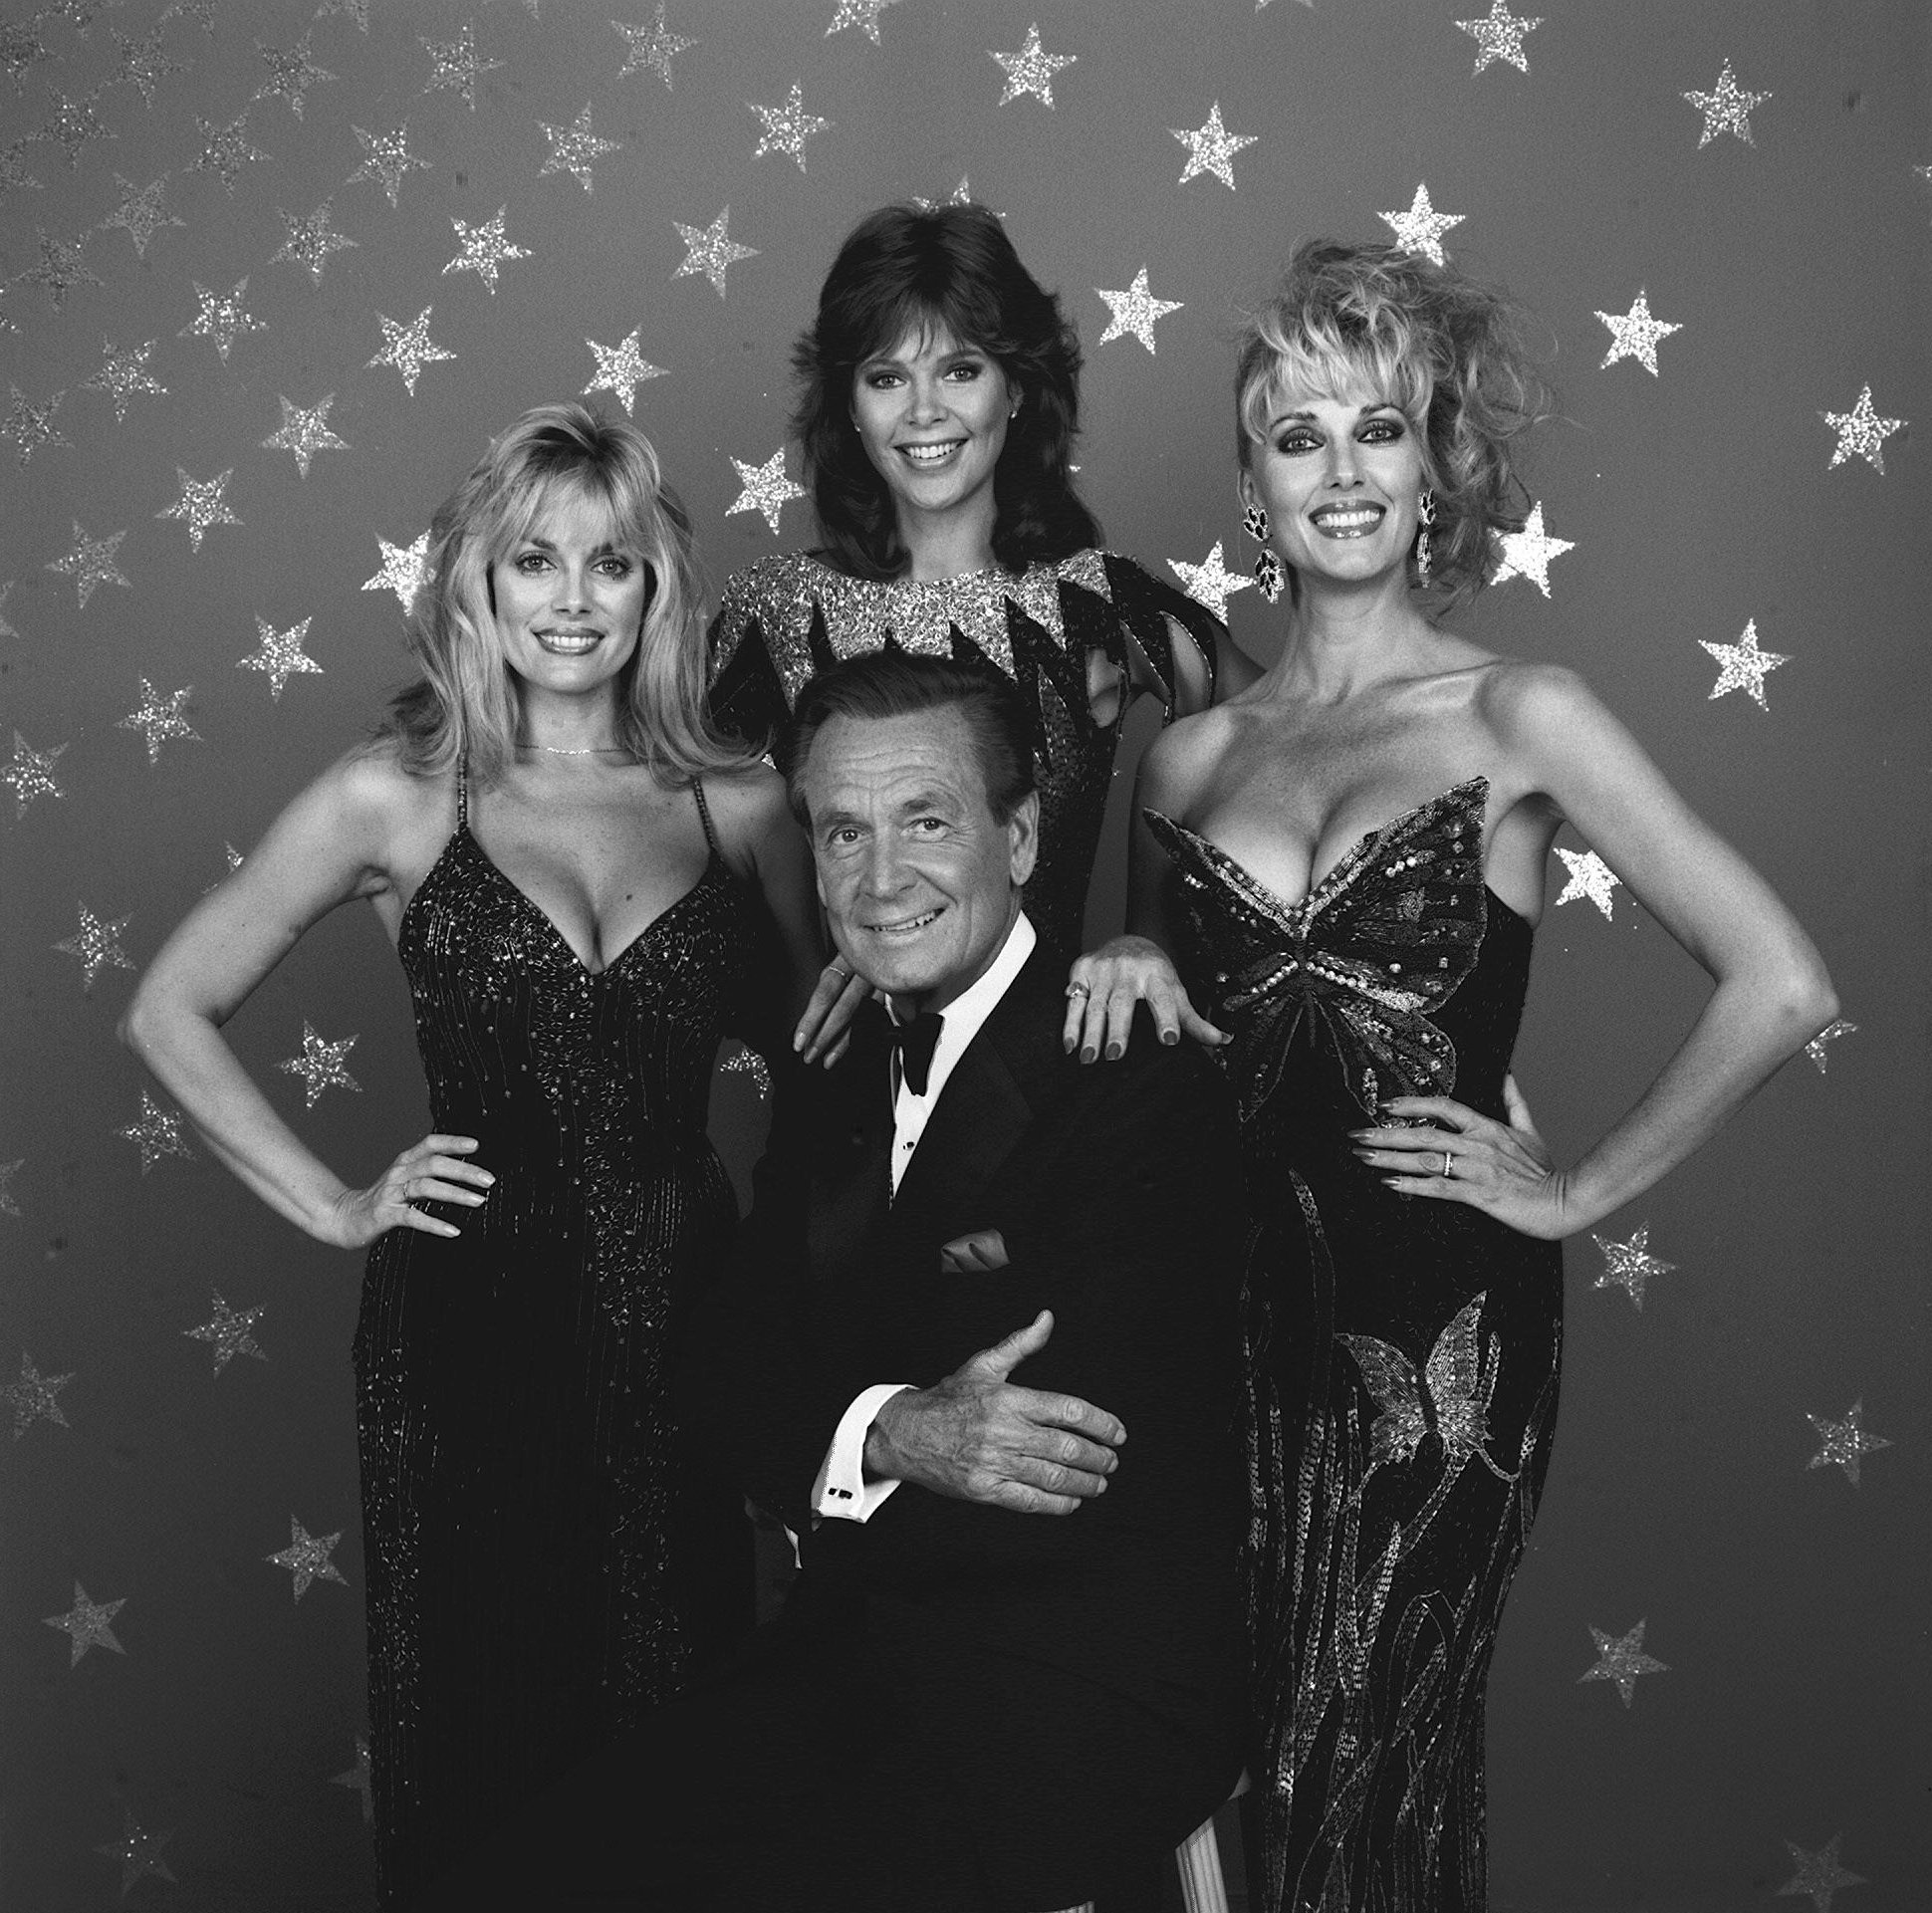 Bob Barker (center) with his 'Barker's Beauties' including to the far left, Dian Parkinson